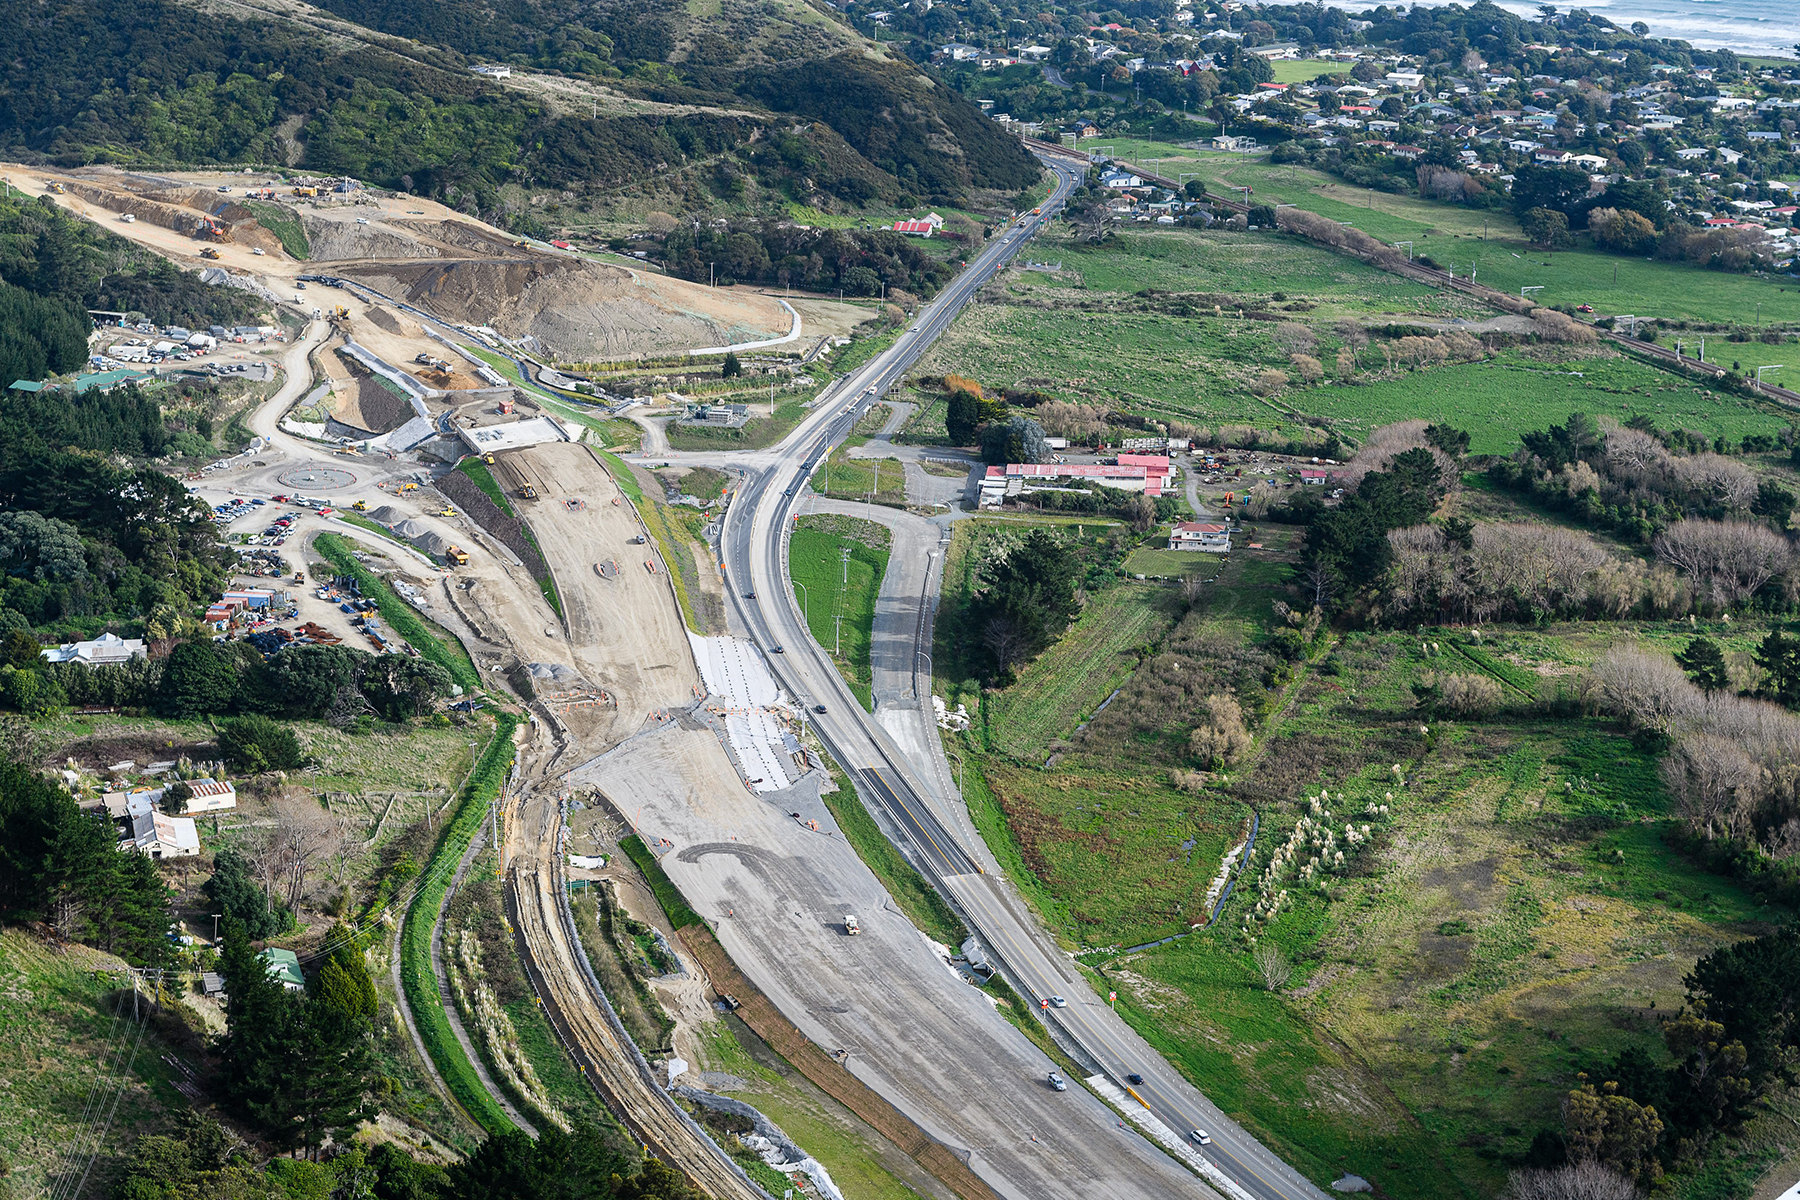 View looking south over Paekakariki with paving works underway.